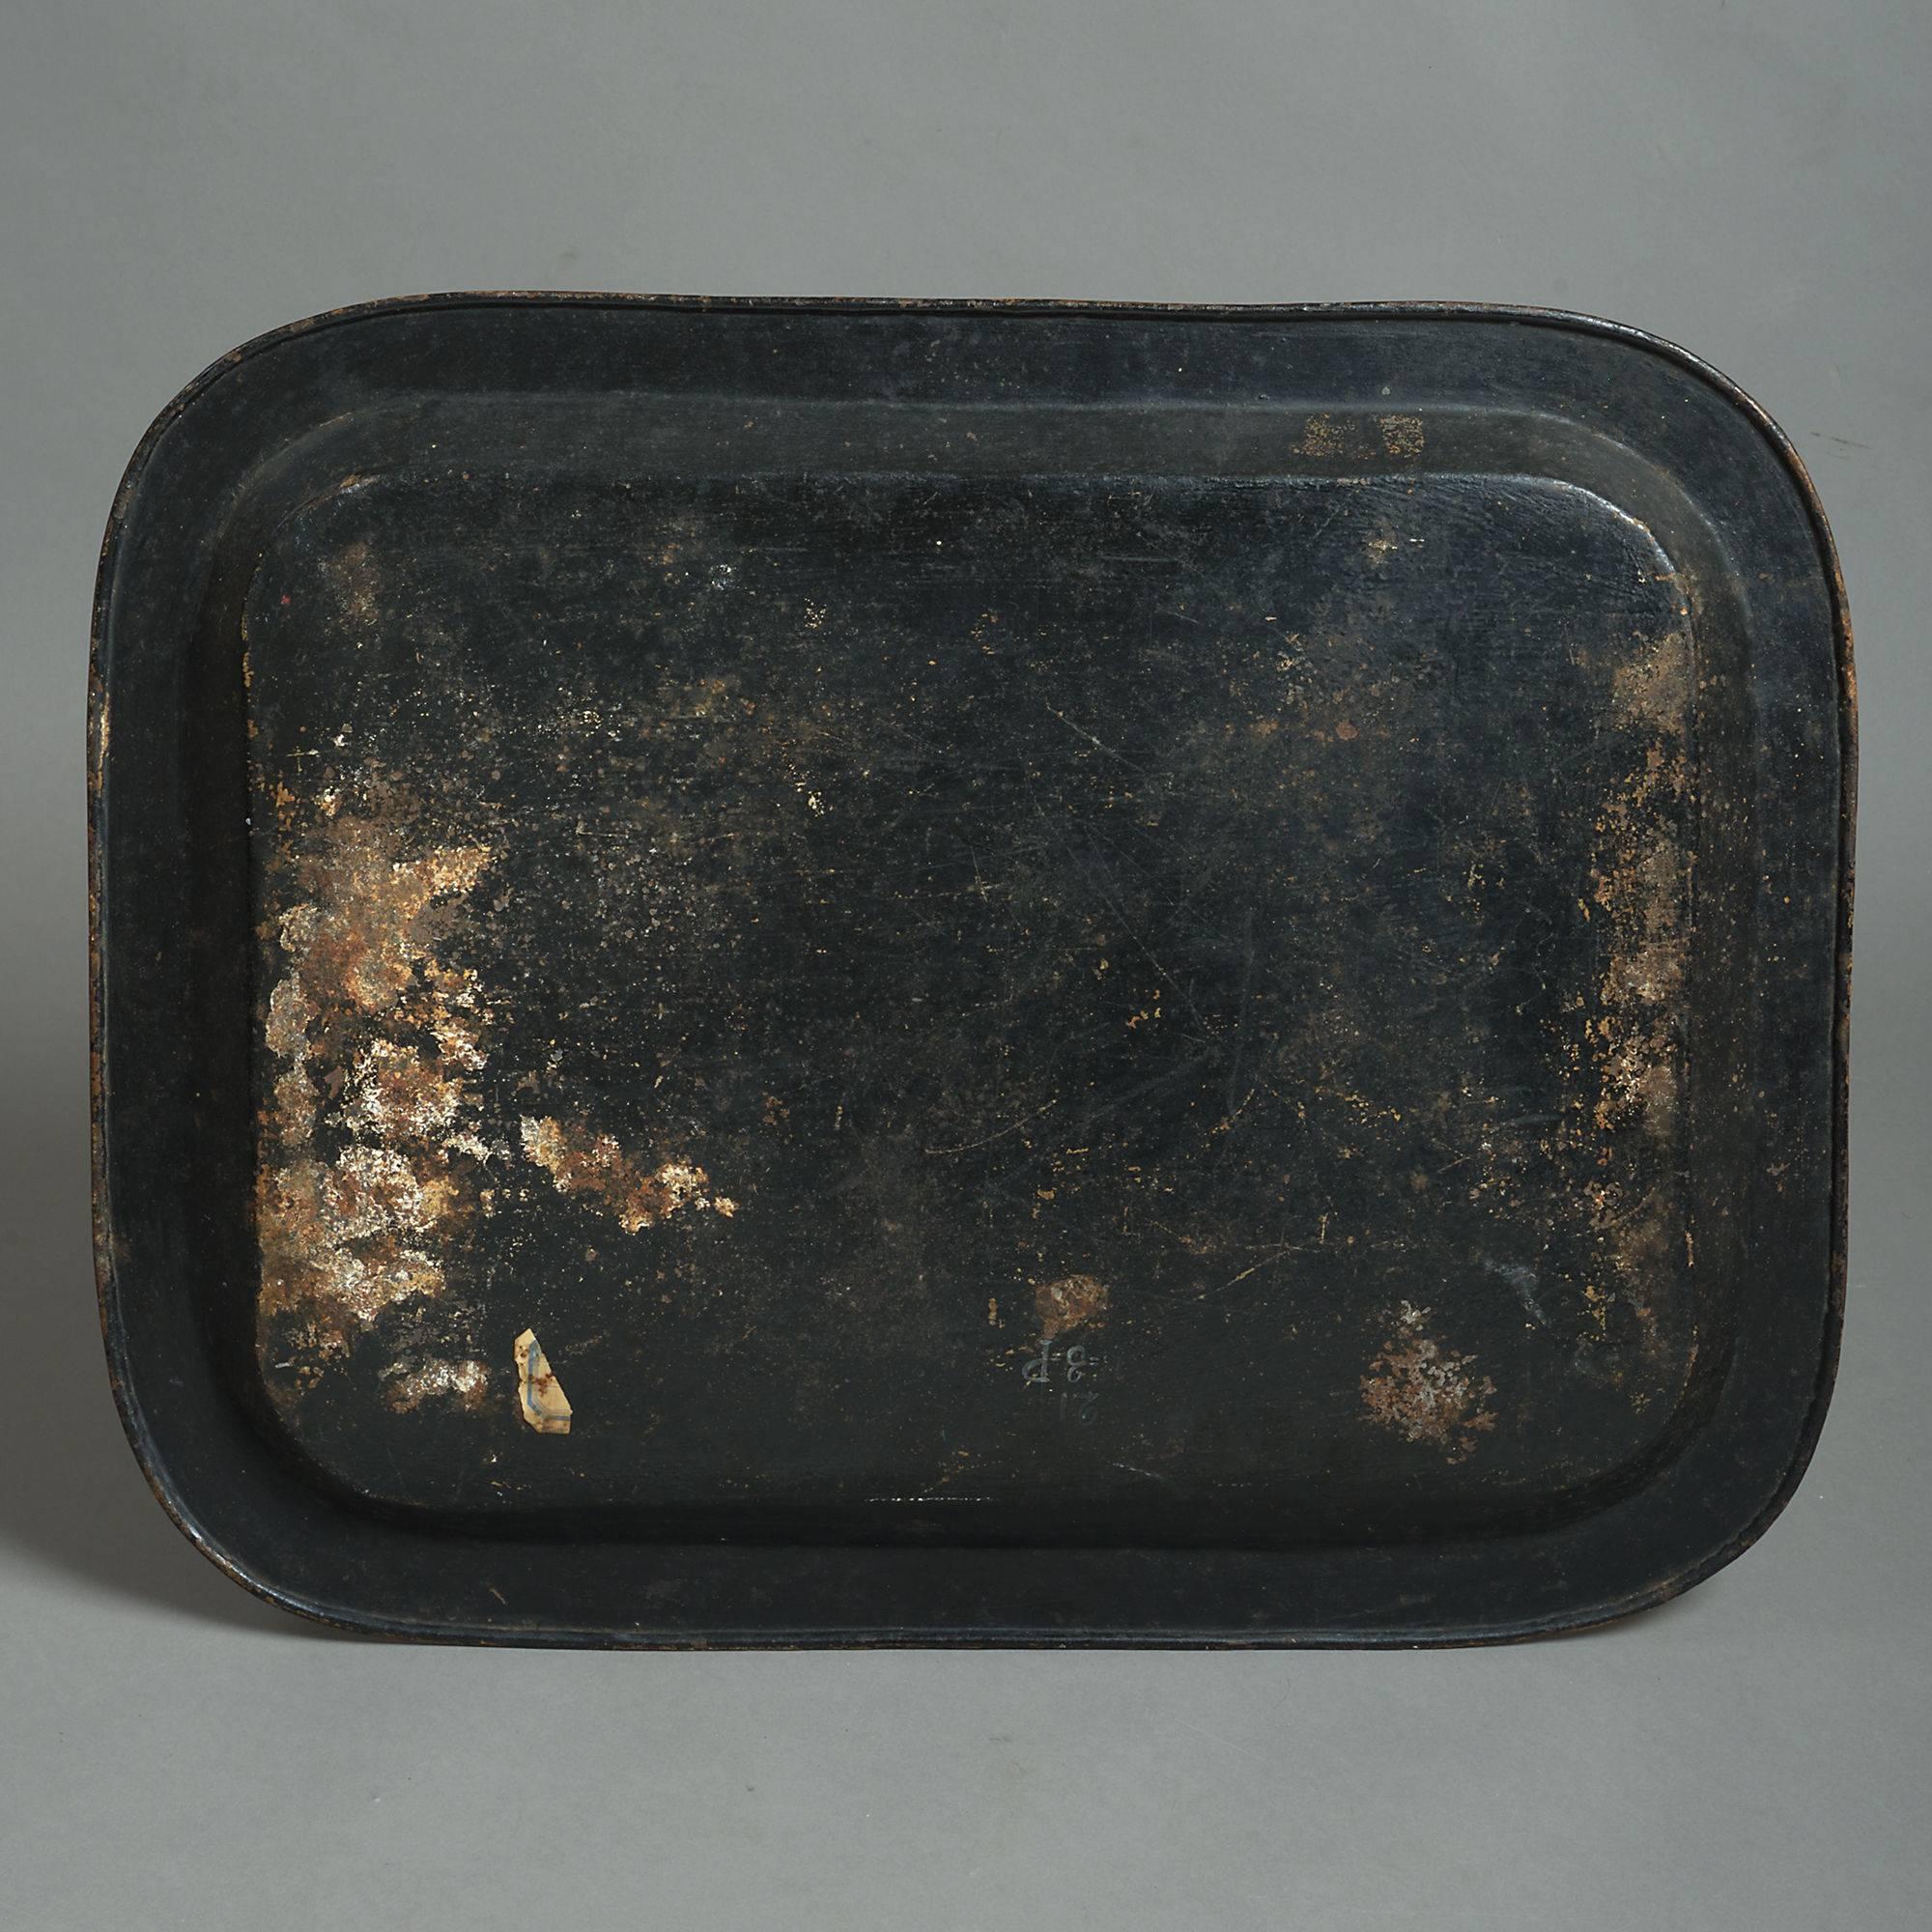 An early 19th century rectangular tole tray, the surface decorated with gilded chinoiserie upon a black ground.